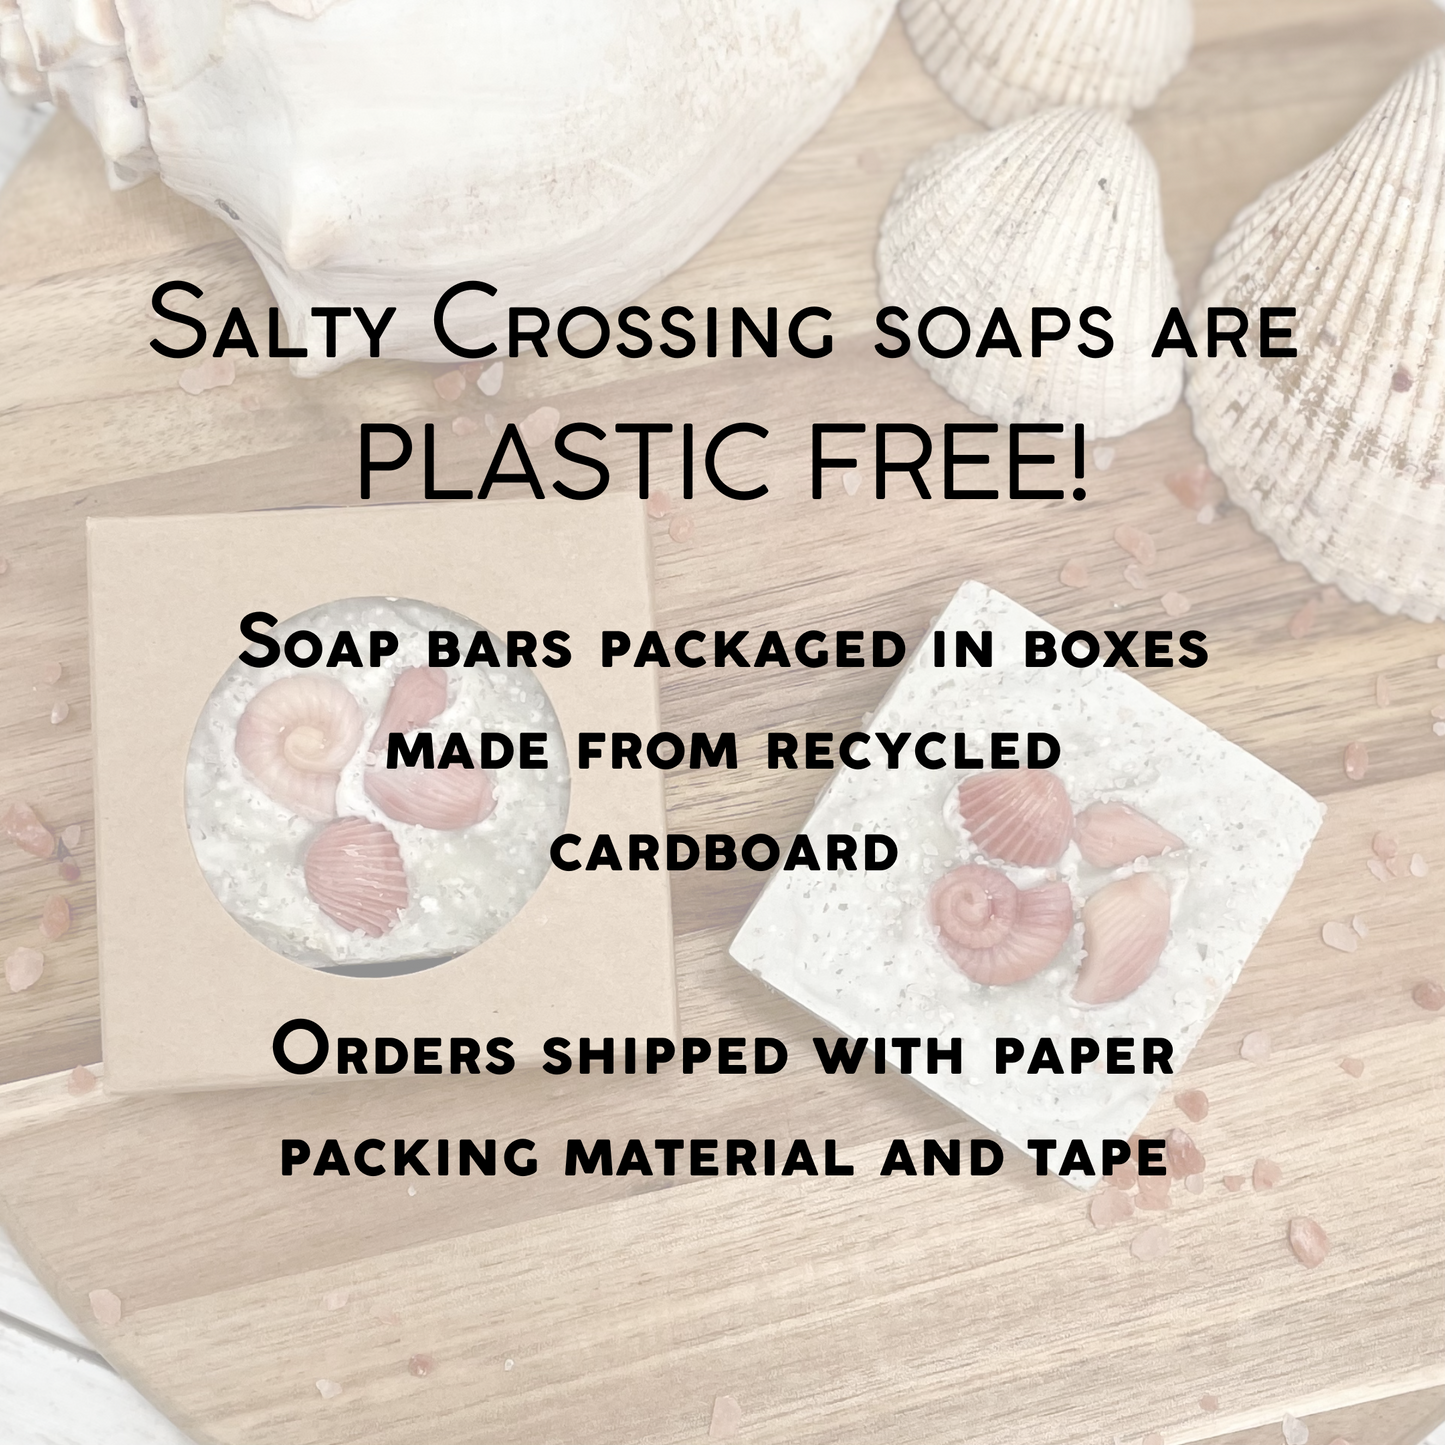 Graphic wit text- salty crossing soaps are plastic free. Soap bars are packaged in boxes made from recycled cardboard. Orders are shipping with paper packing material and tape.